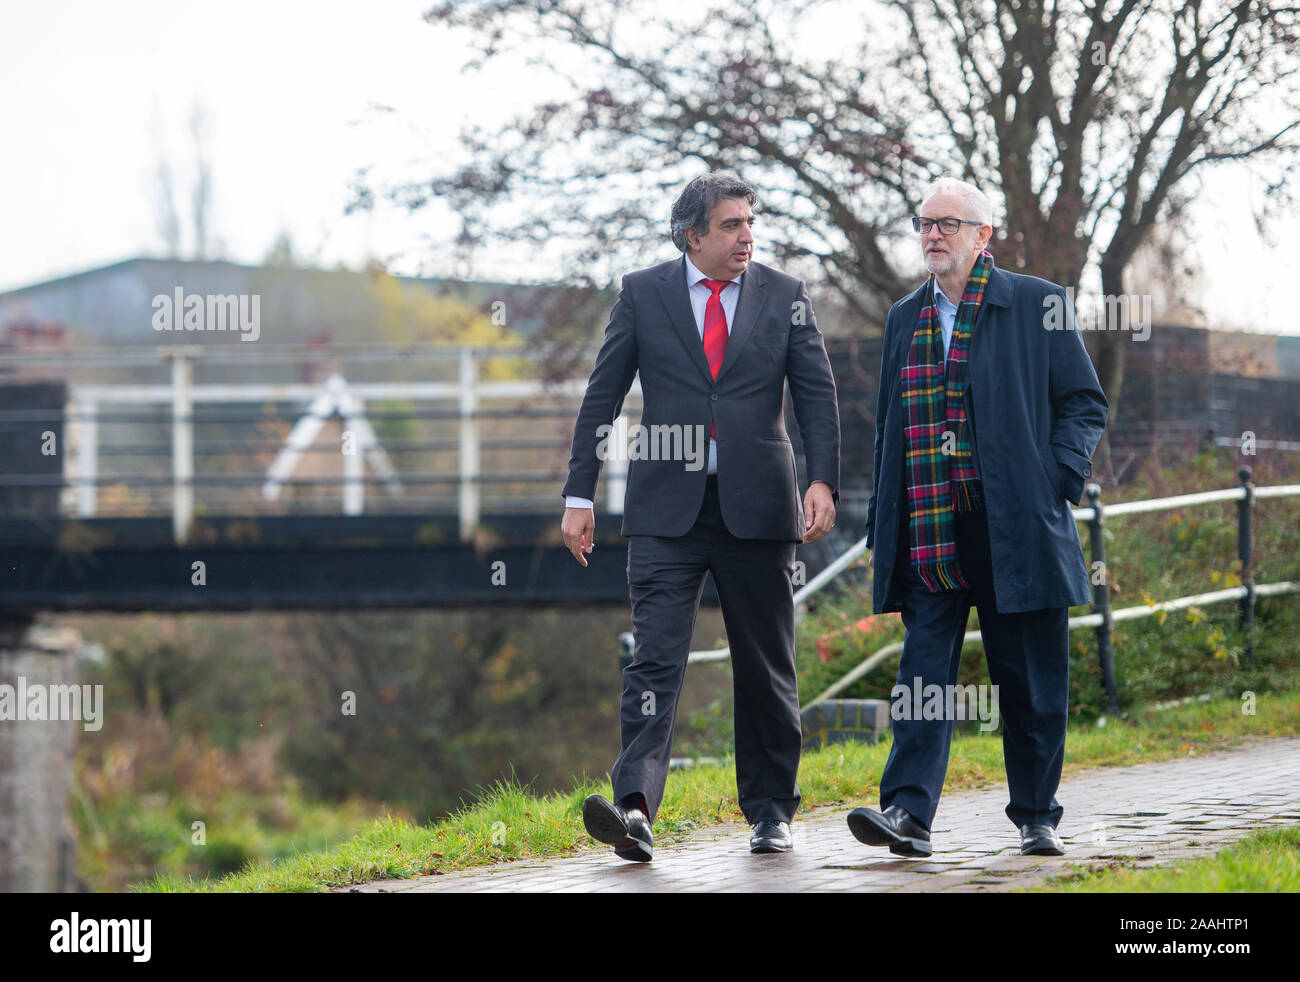 Labour candidate for Stoke-on-Trent, South Mark McDonald (left), during a visit with Labour Party leader Jeremy Corbyn in Stoke-on-Trent, while on the General Election campaign trail. Stock Photo